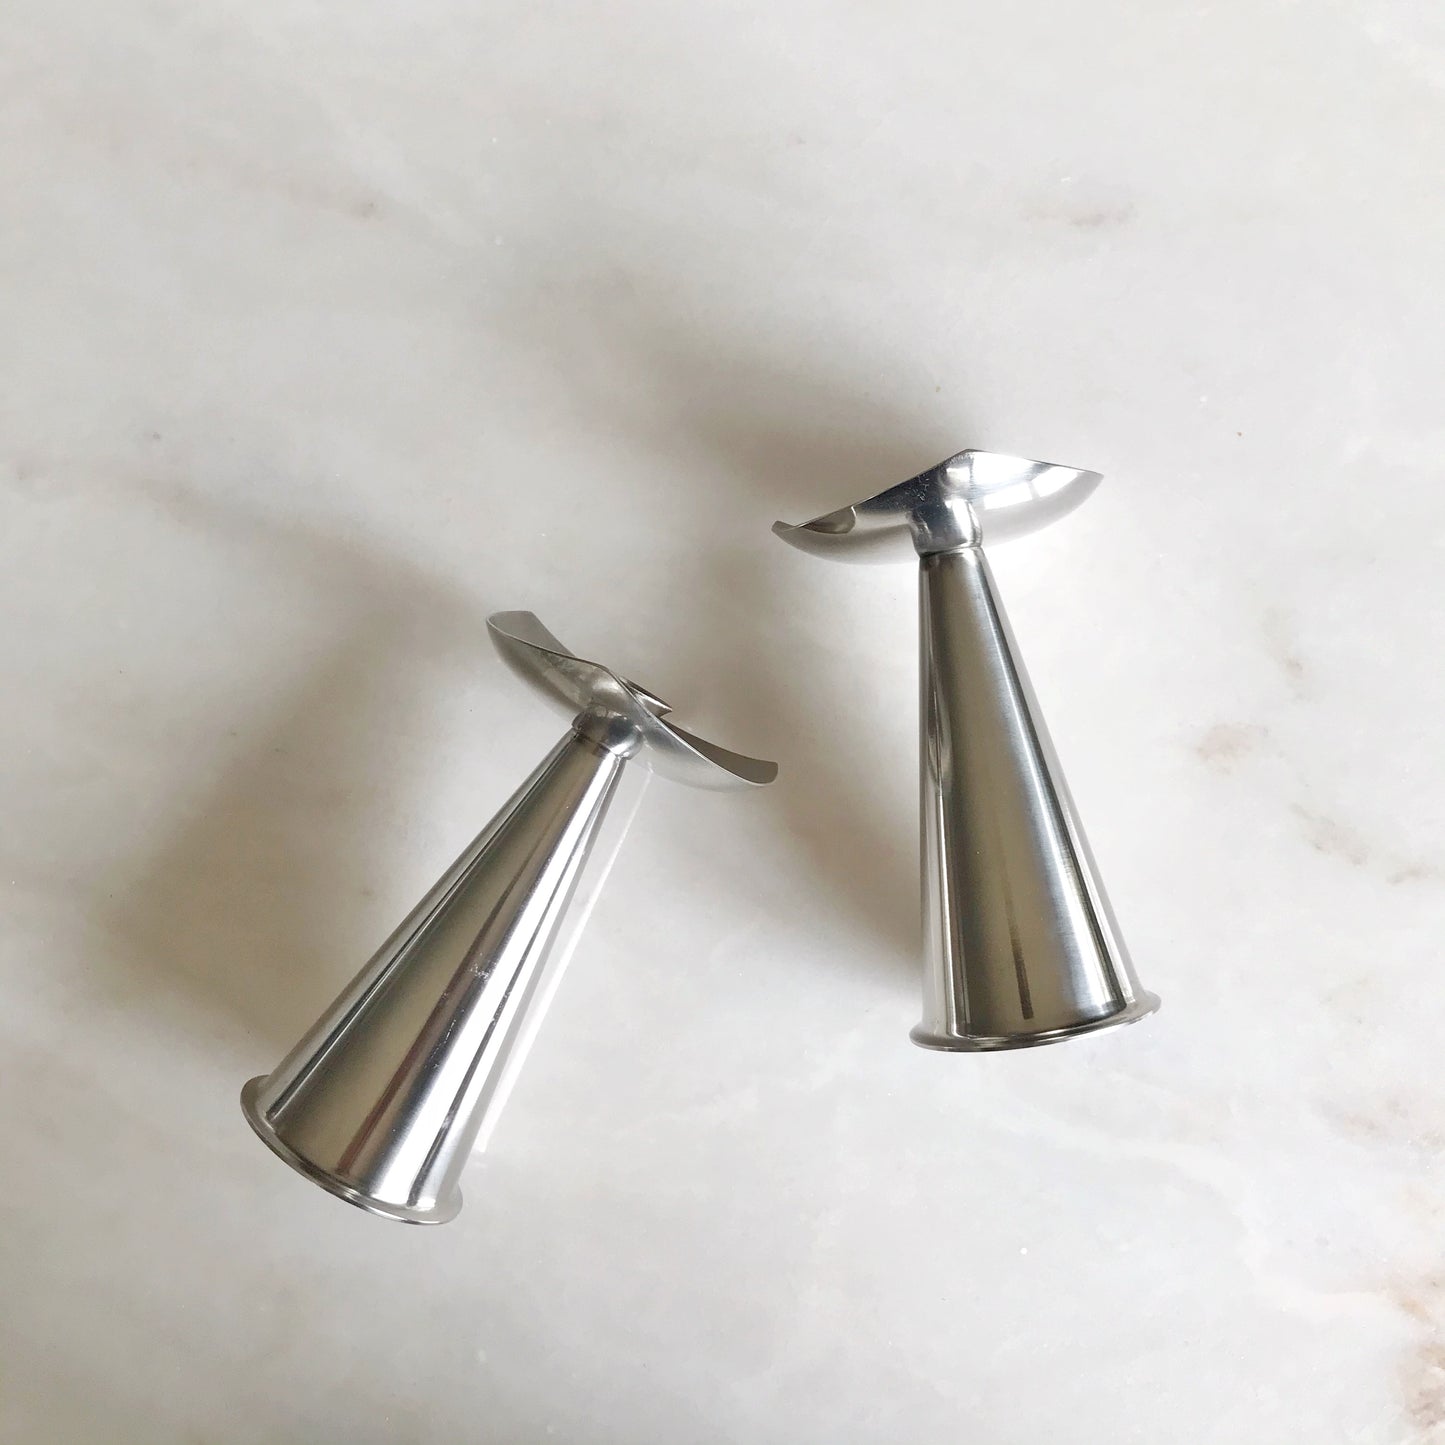 Pair of Tall Vintage Stainless Candle Holders